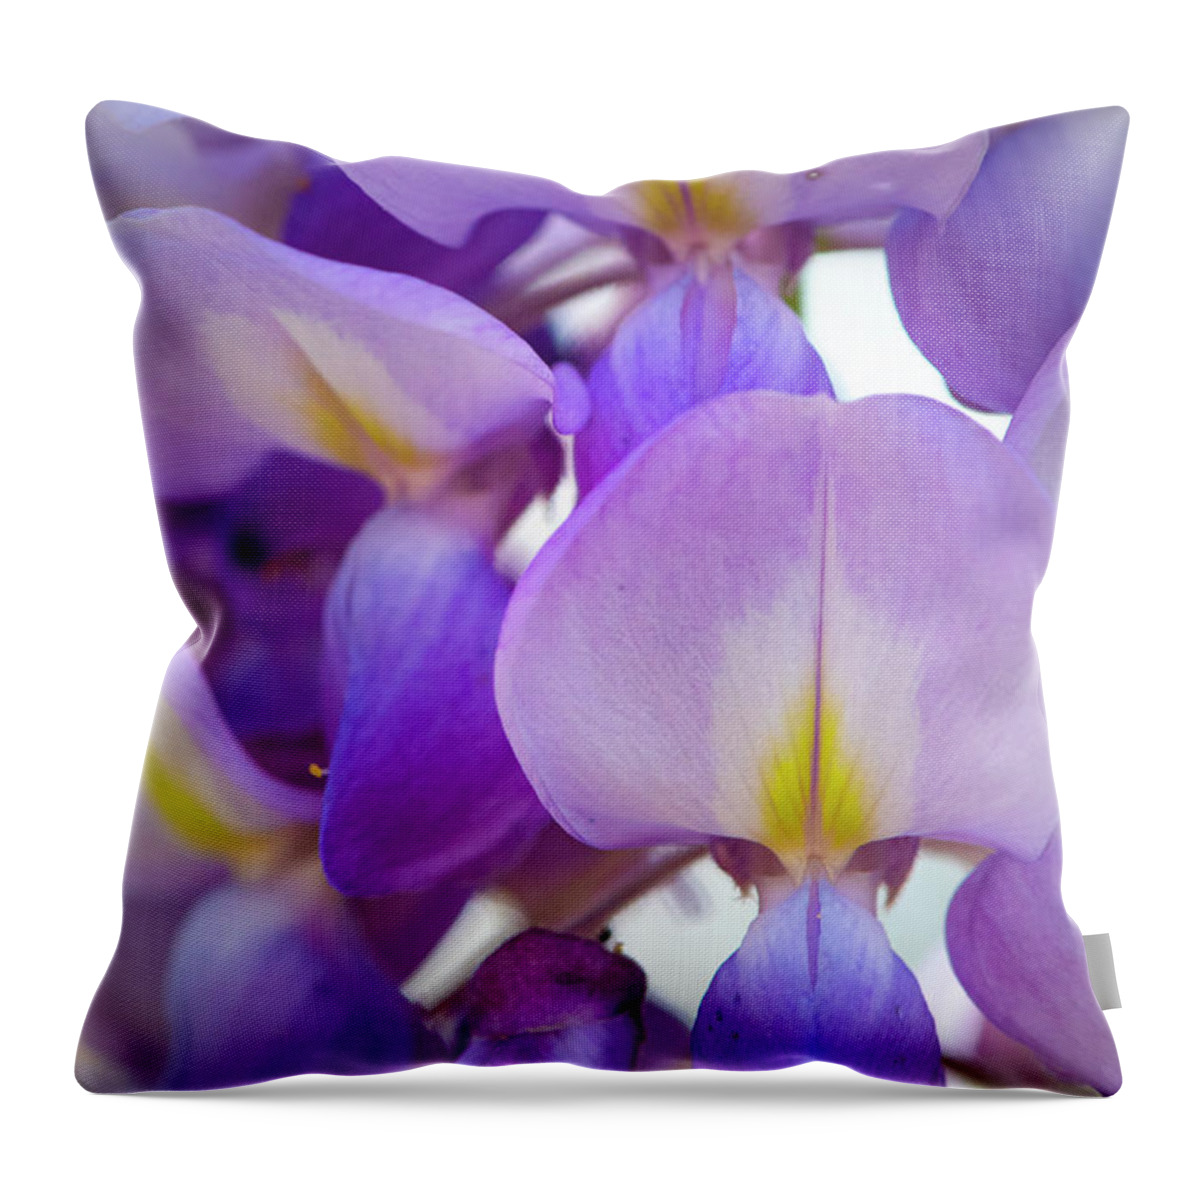 Wisteria Throw Pillow featuring the photograph Wisteria Close Up by Karen Rispin